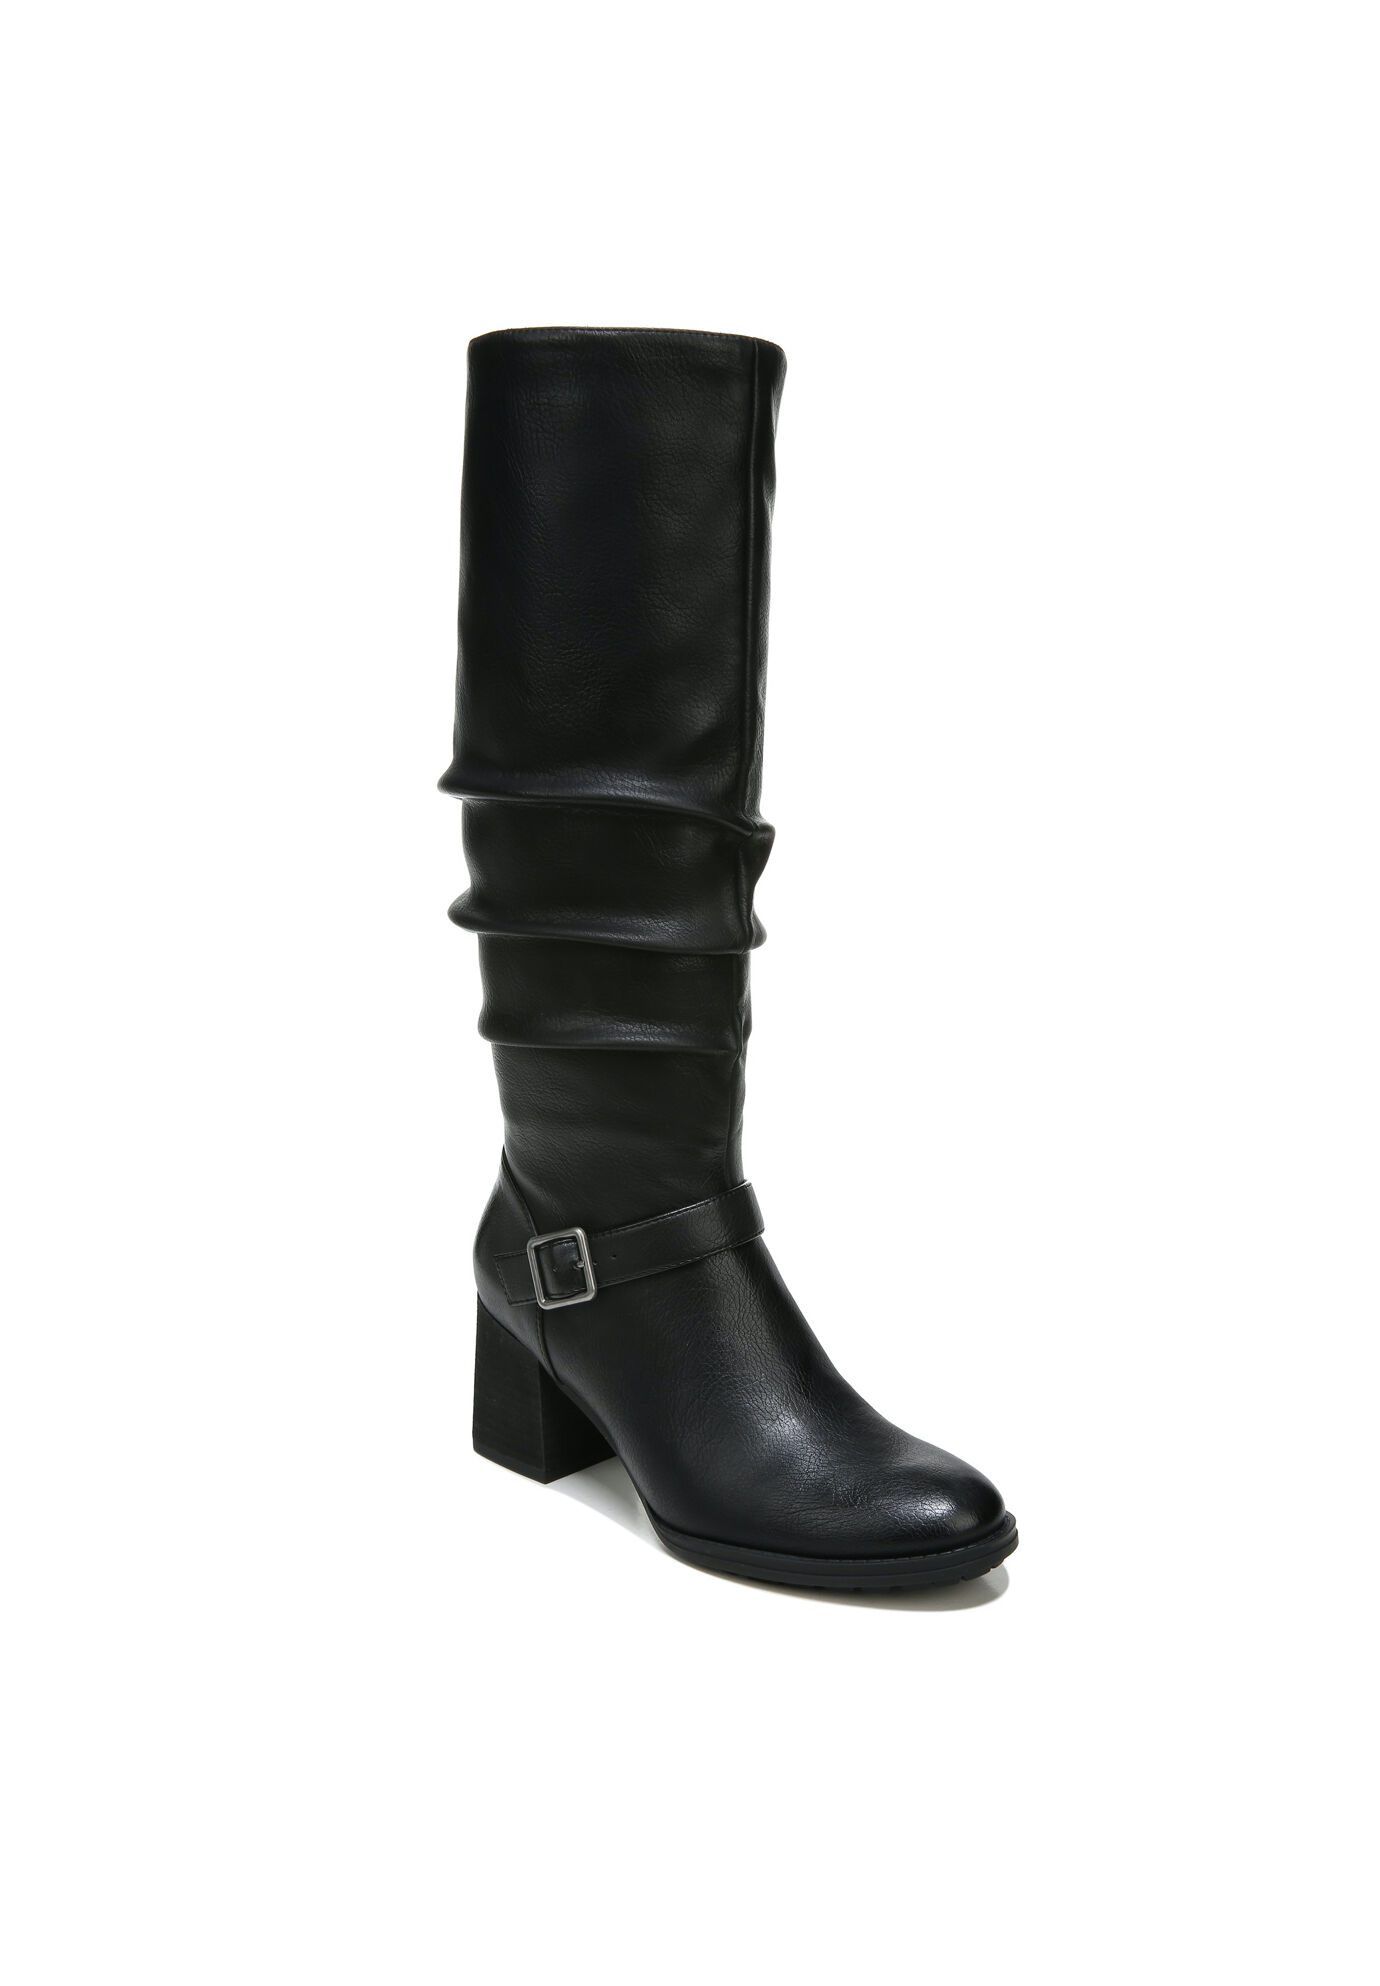 Women's Frost Knee High Boot by Roamans in Black (Size 6 M)